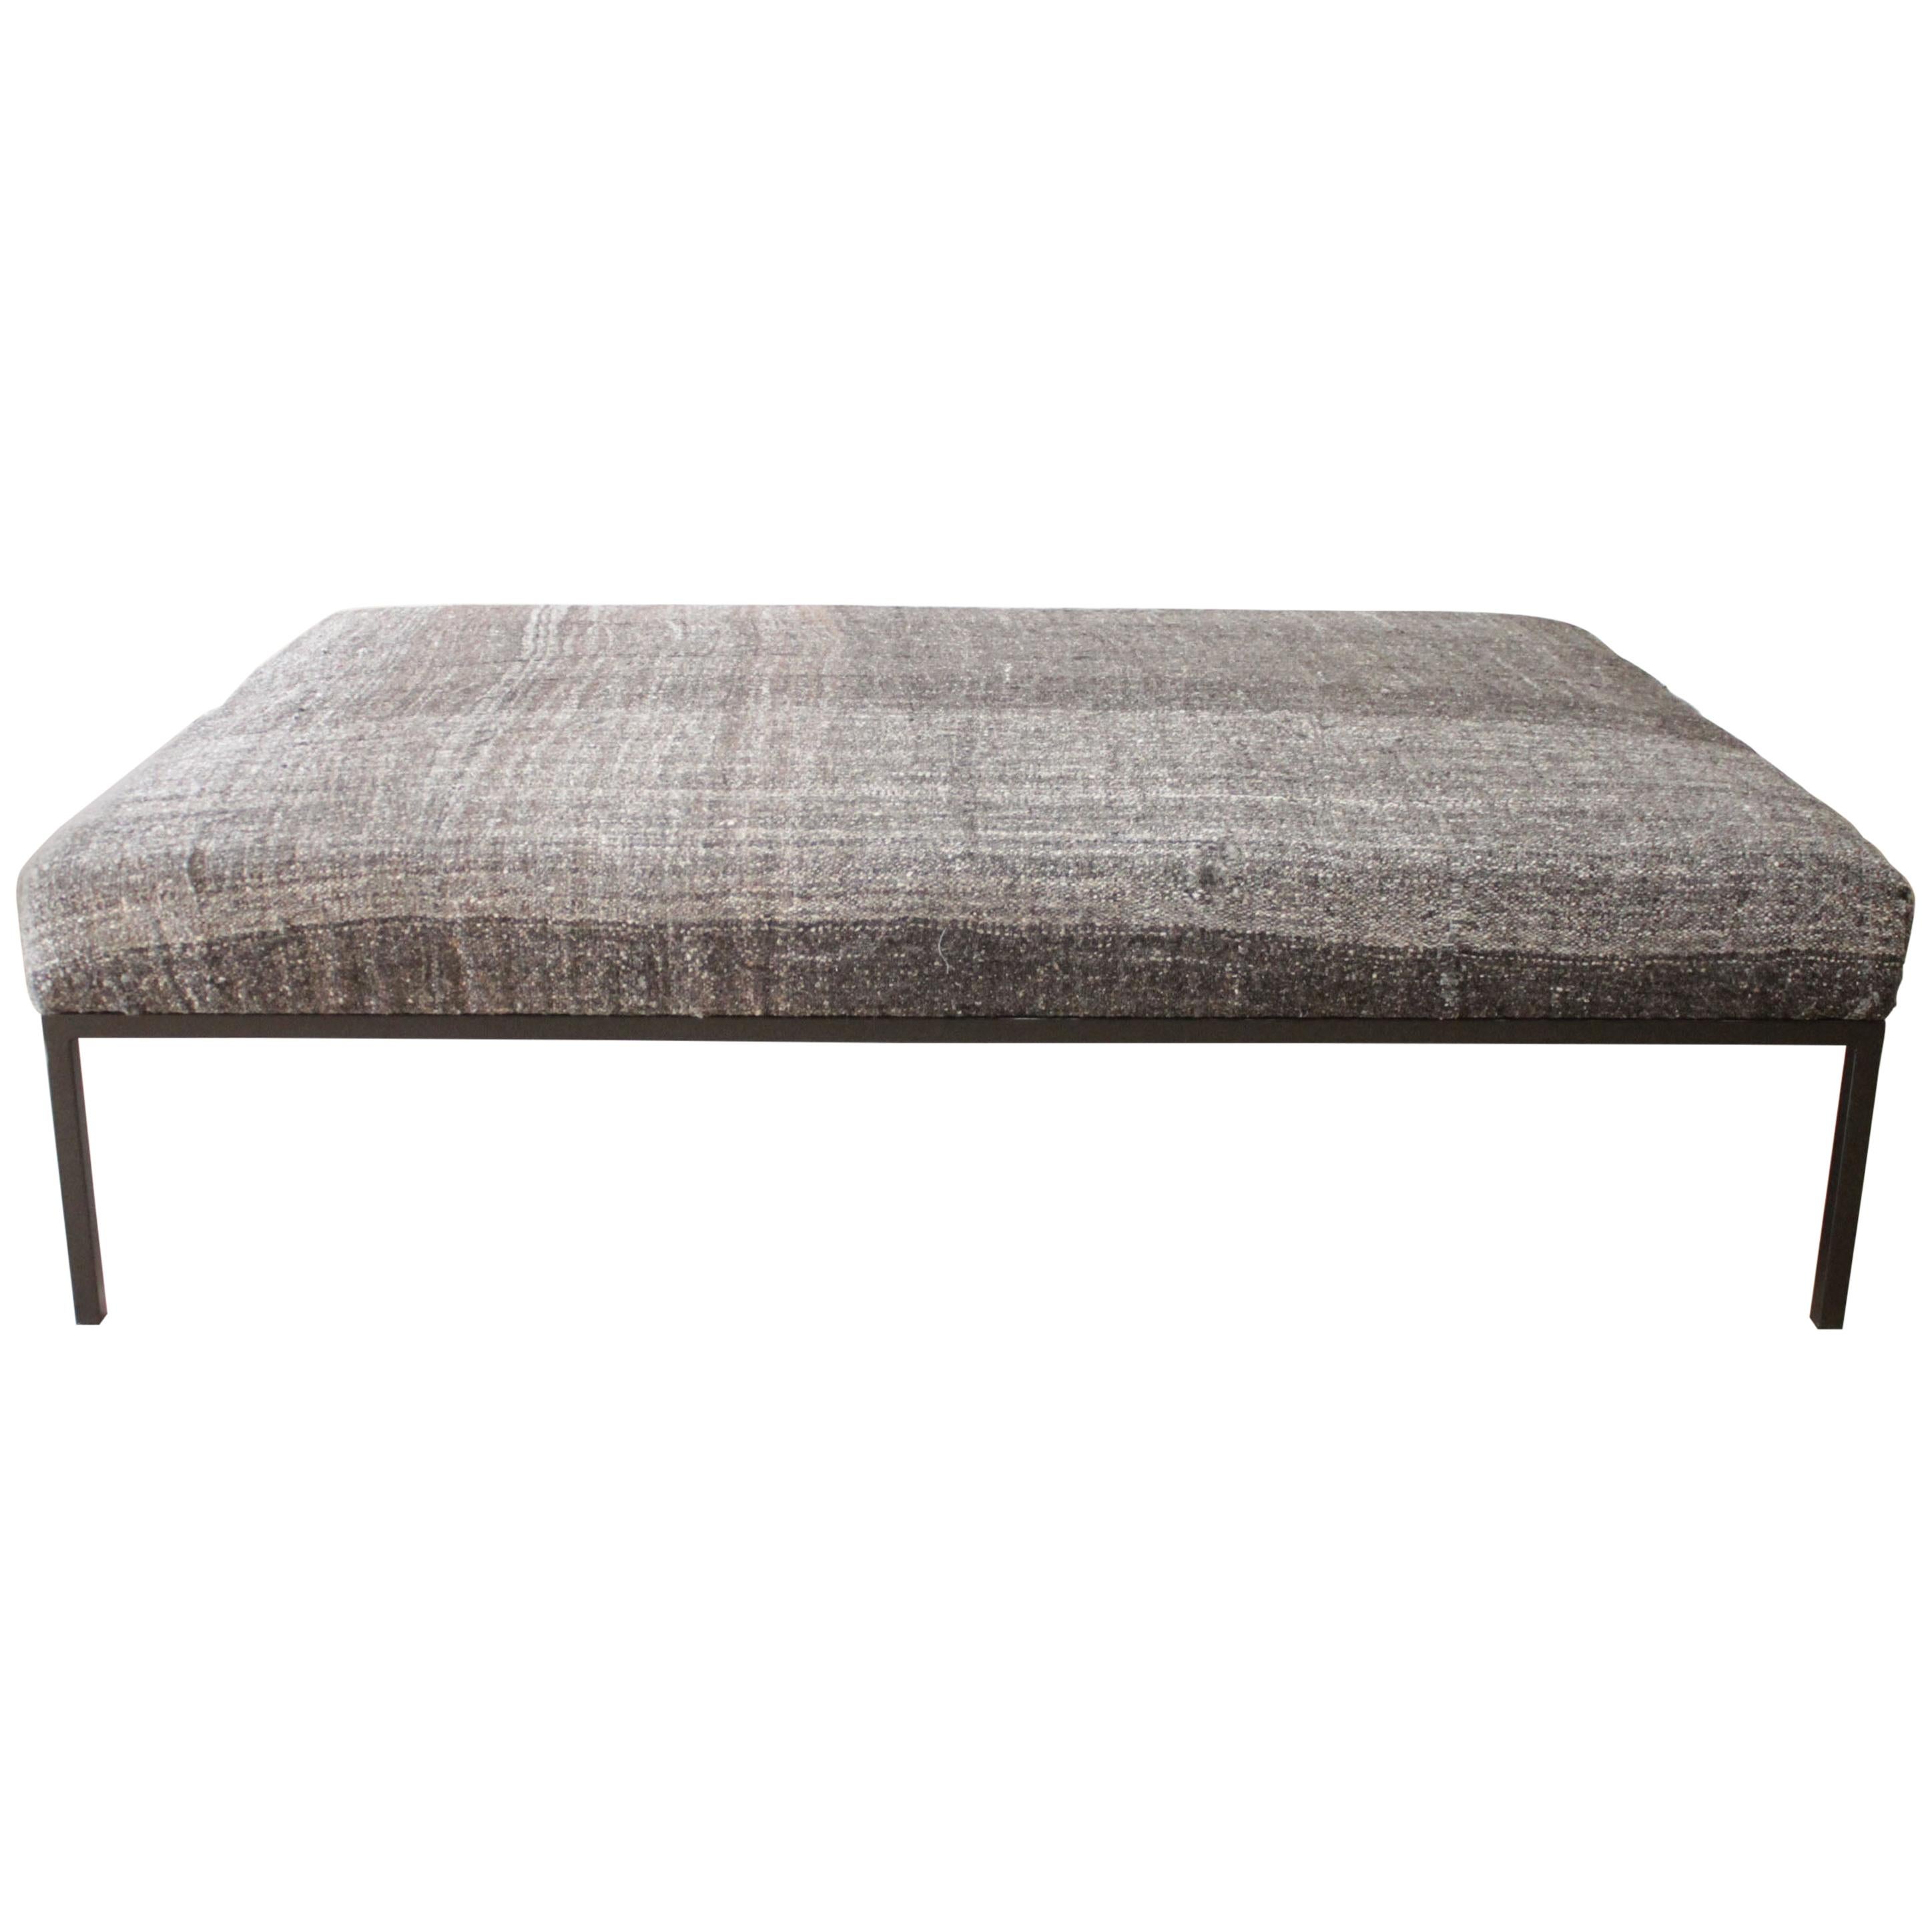 Large Custom Iron Cocktail Table Ottoman Upholstered in a Vintage Turkish Rug